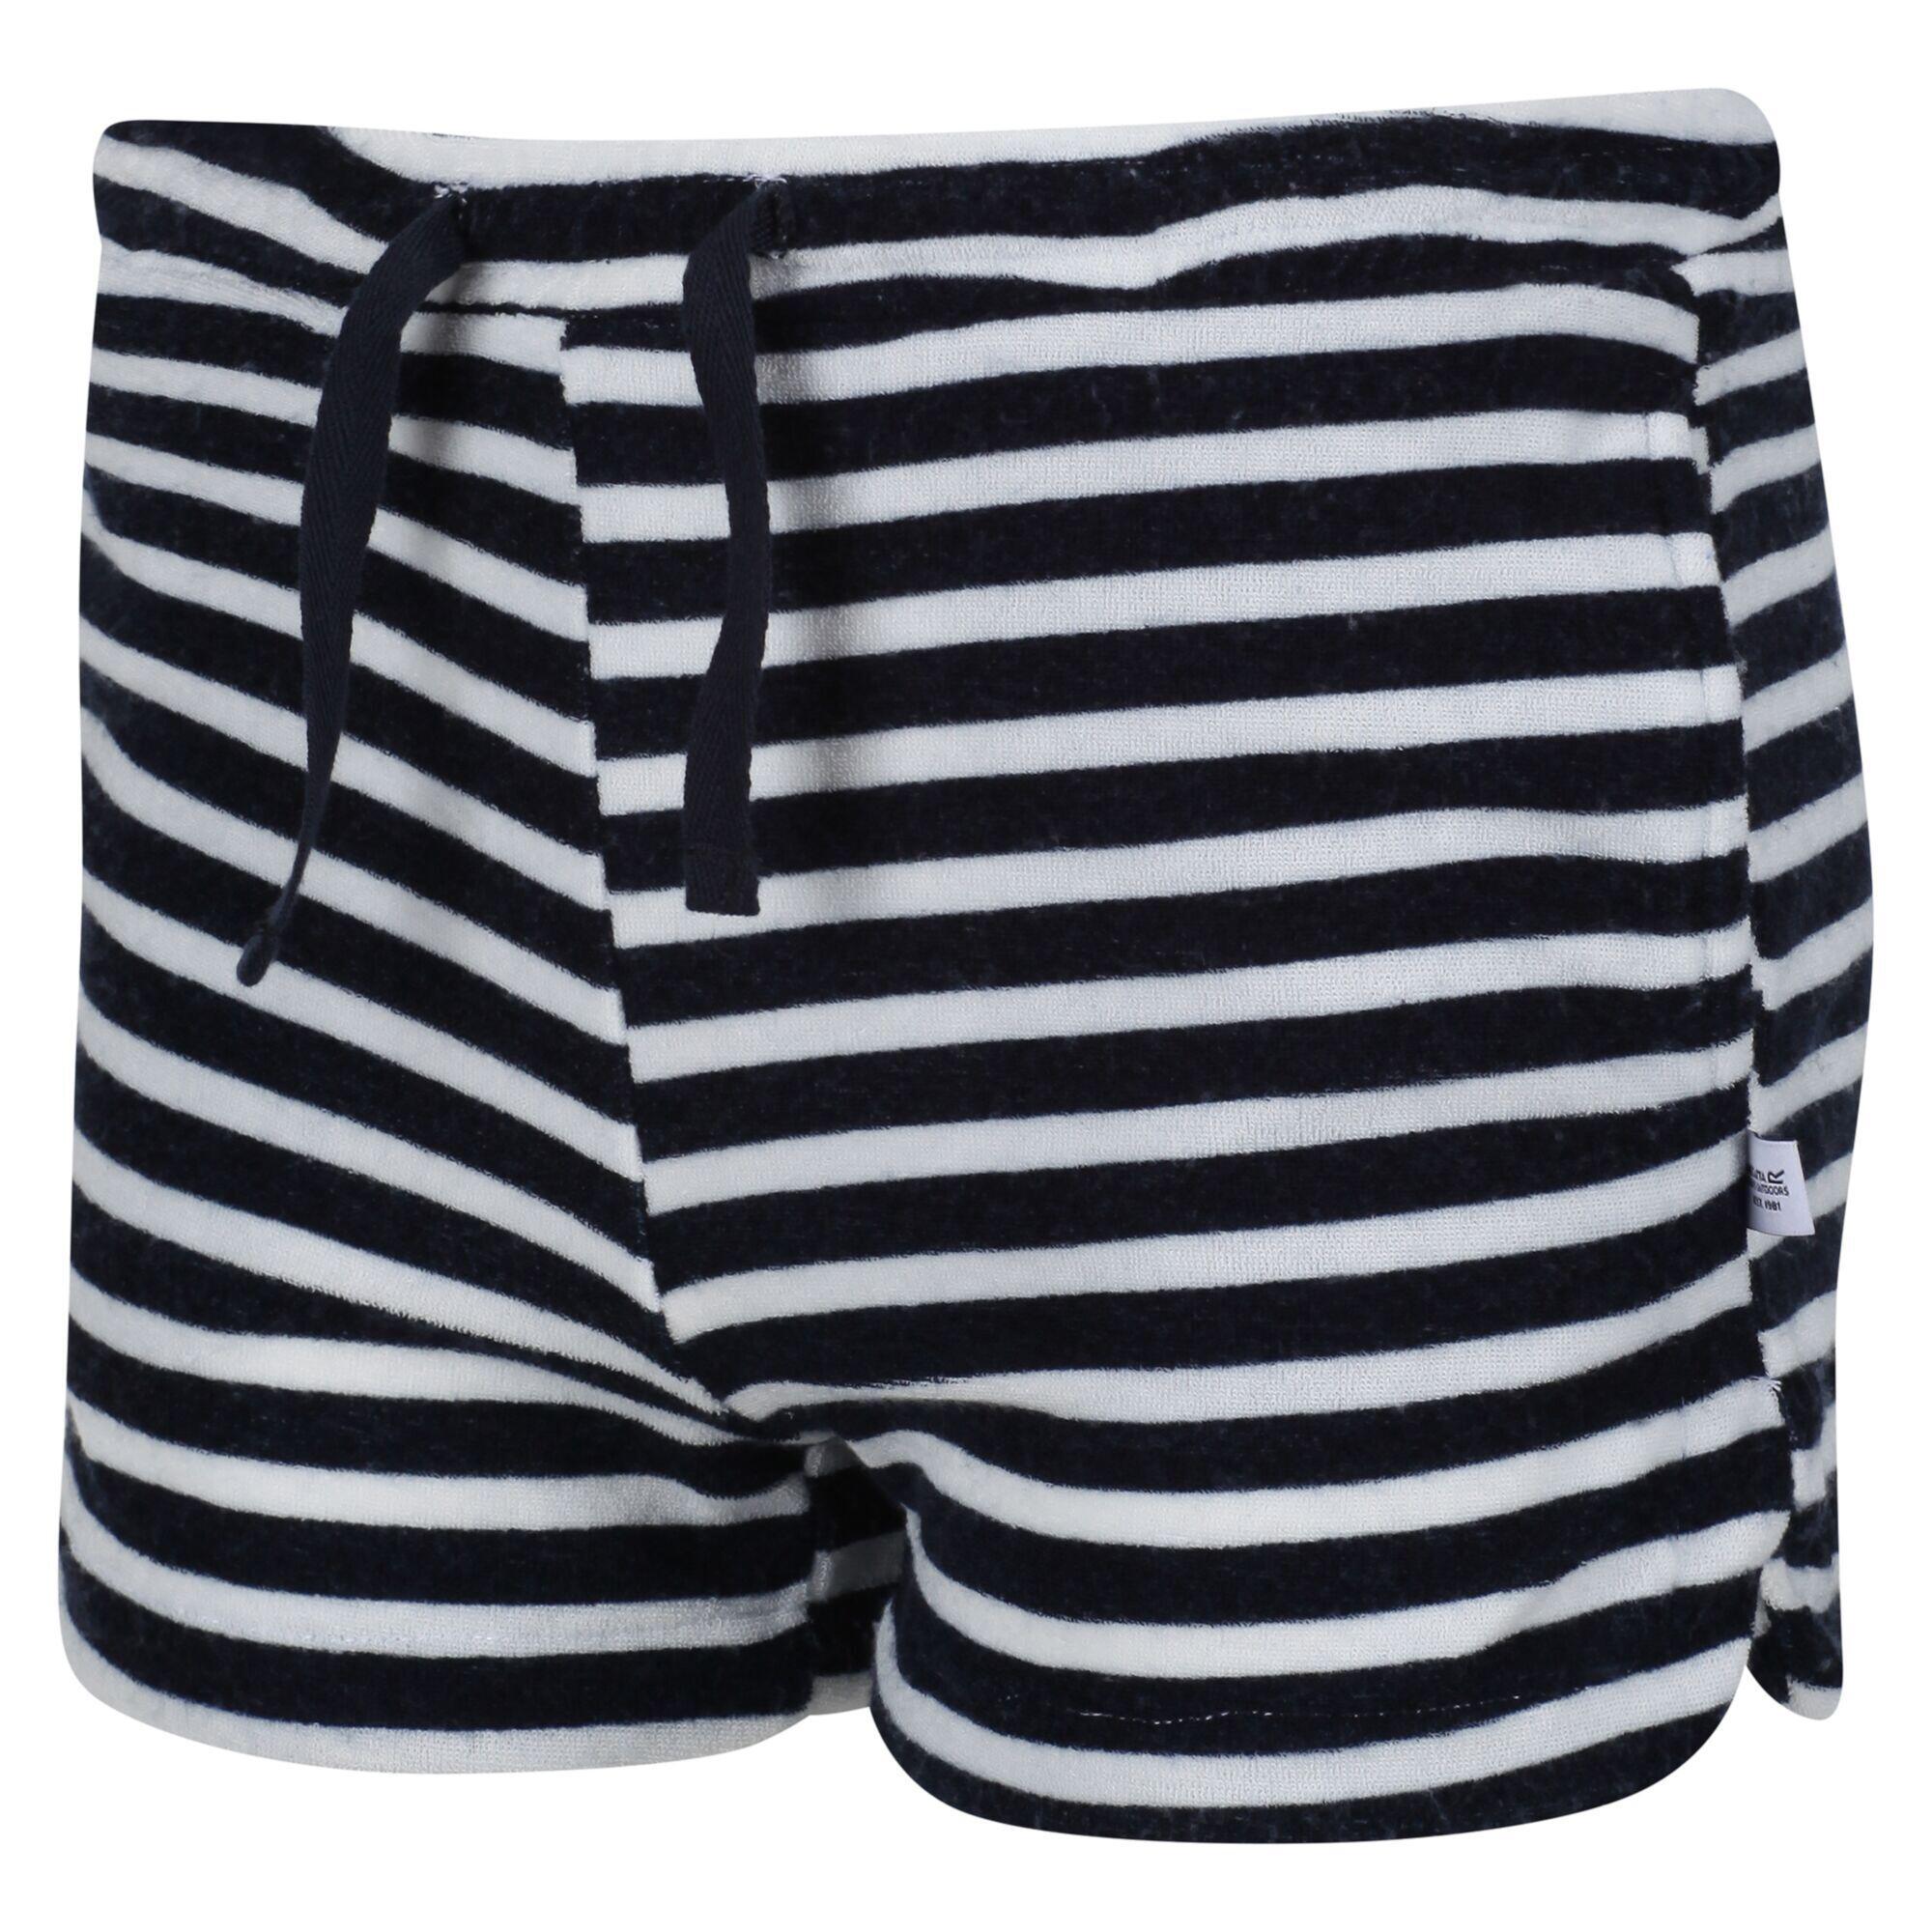 Childrens/Kids Dayana Towelling Stripe Casual Shorts (Navy/White) 4/5